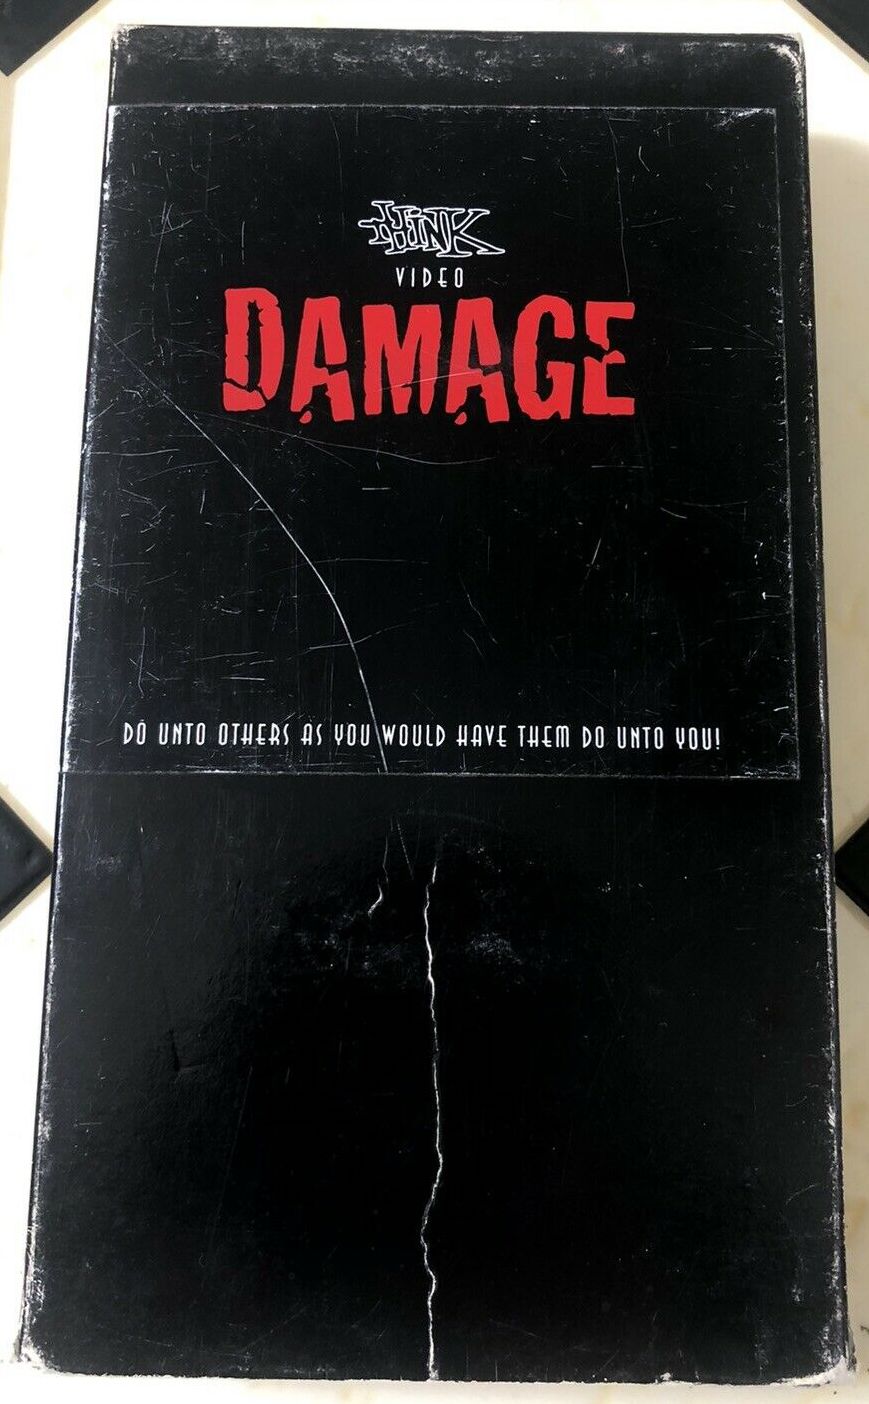 Think - Damage cover